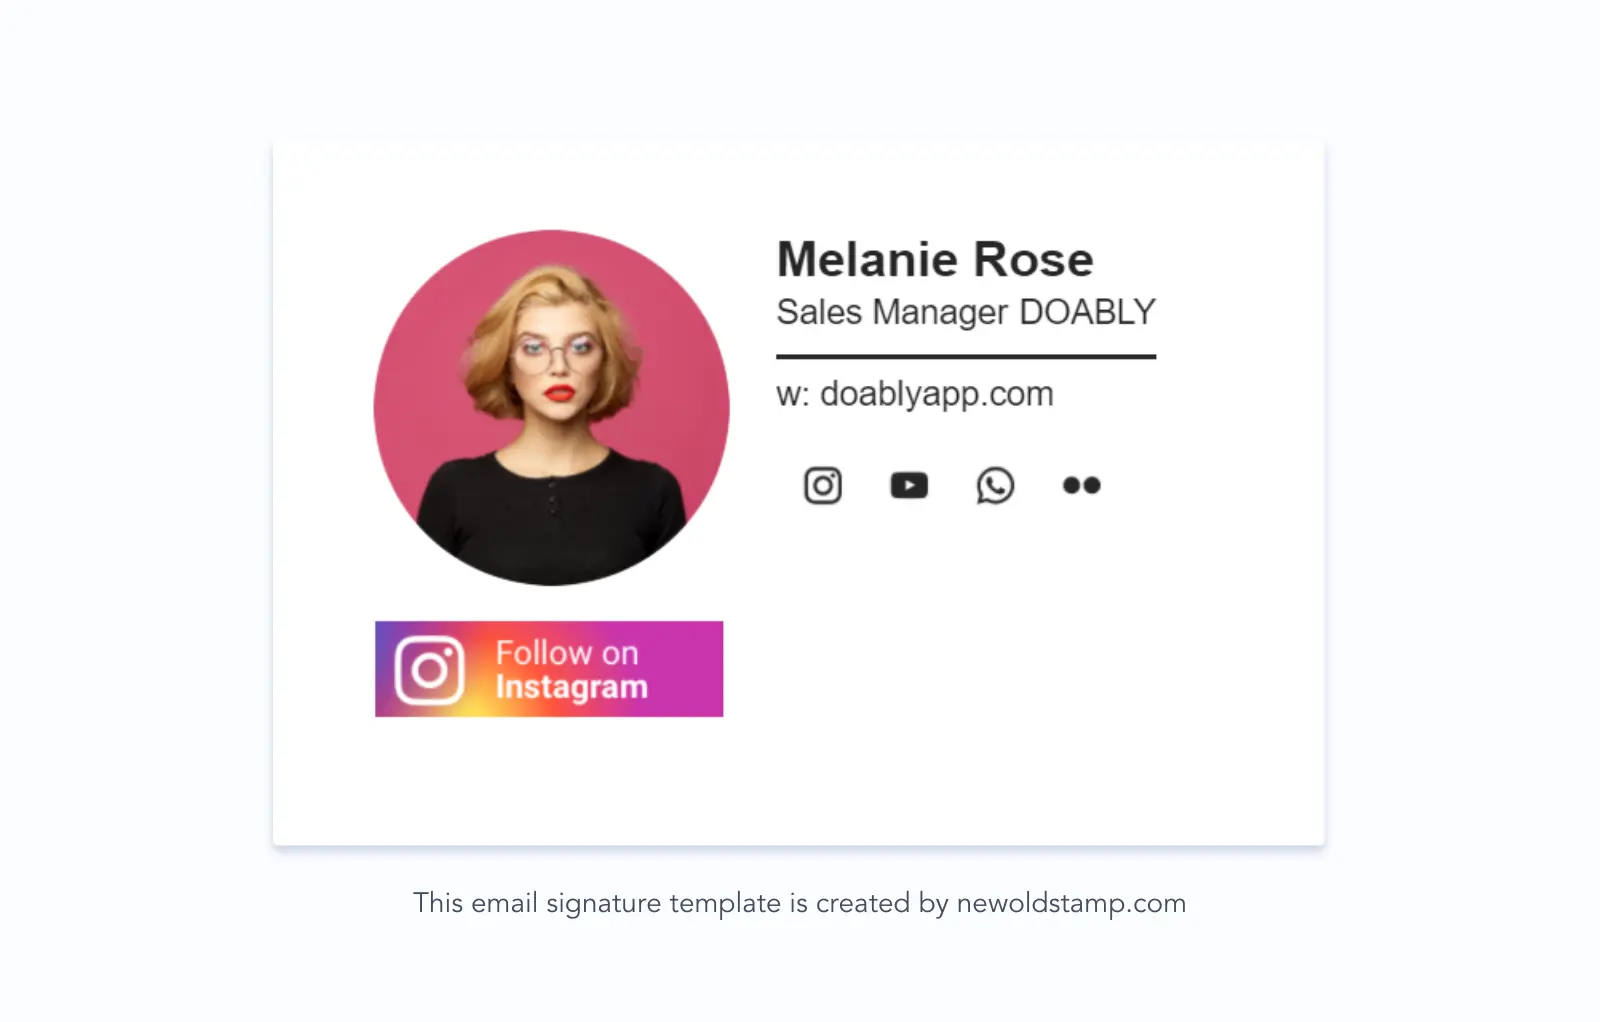 how to add social media icons to outlook email signature